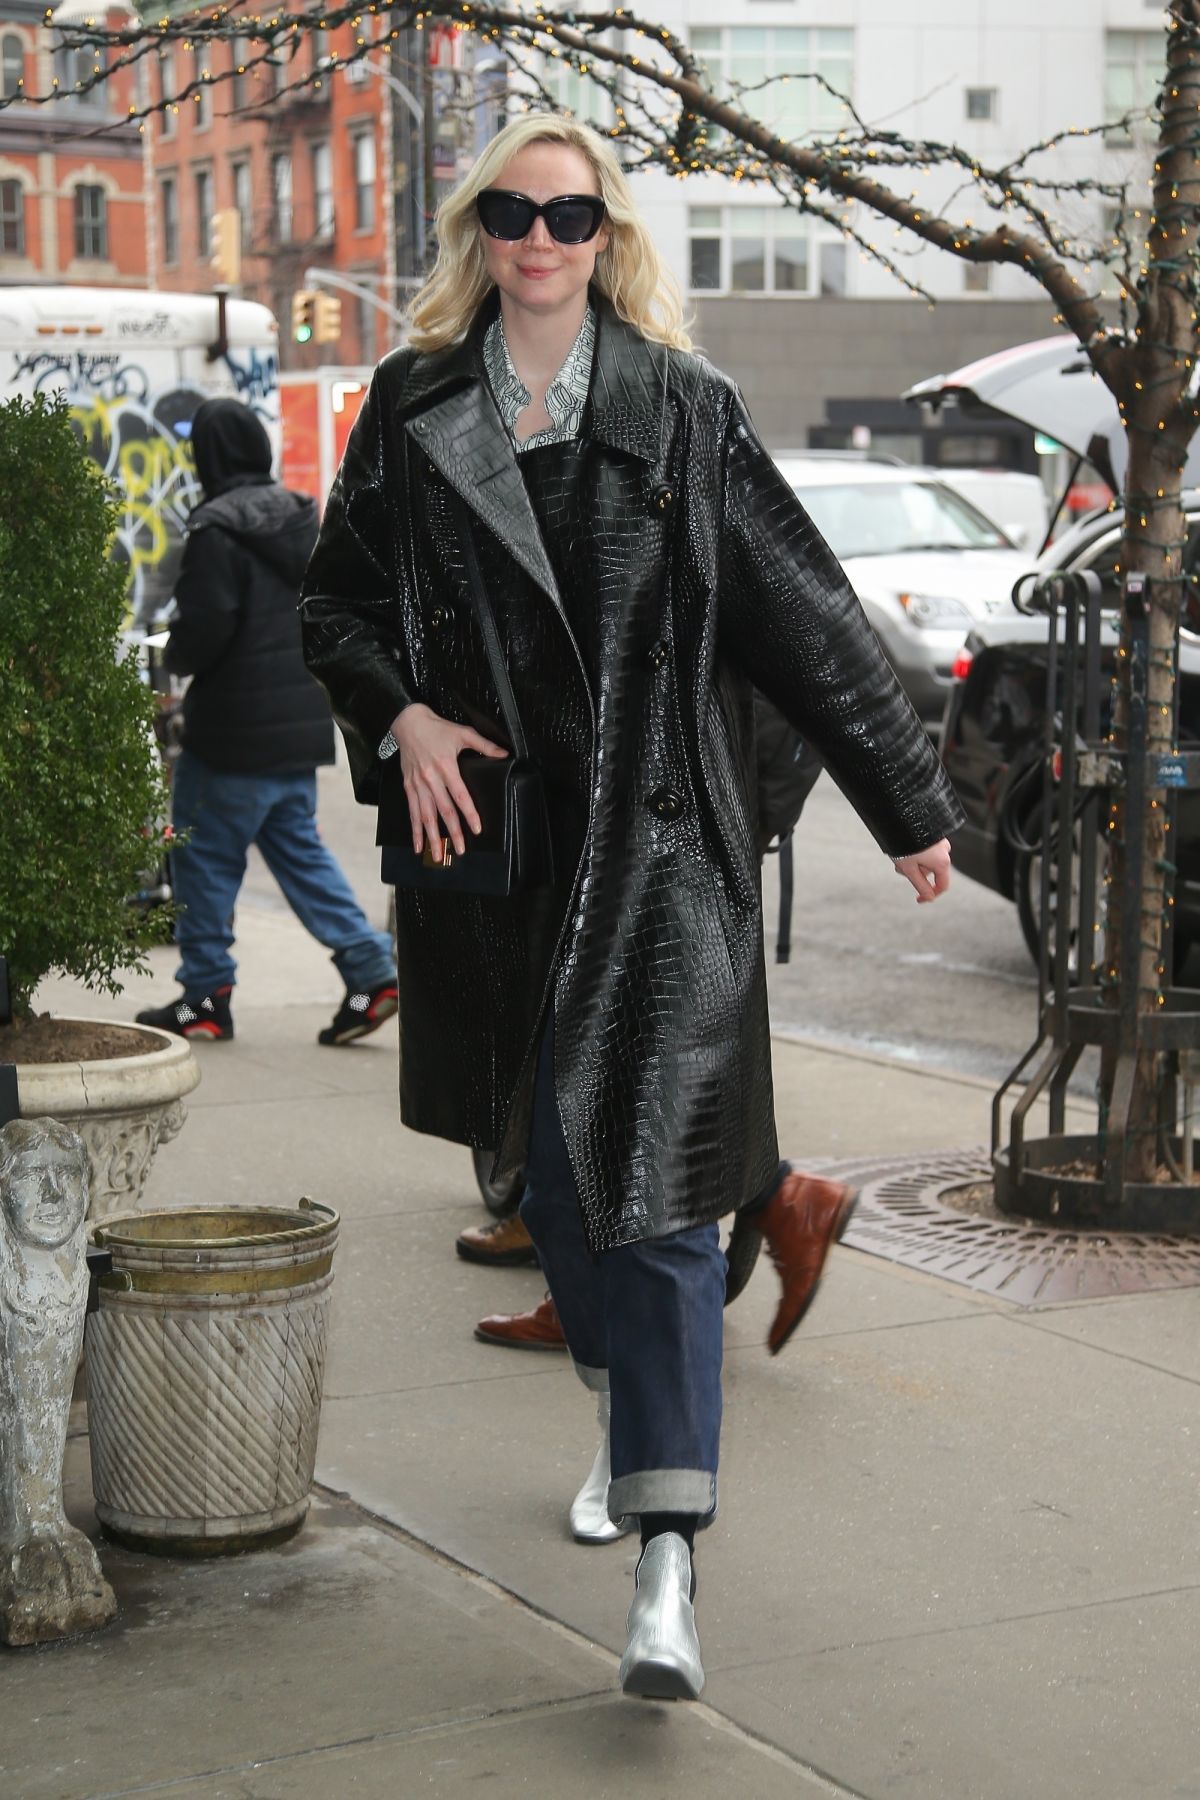 GWENDOLINE CHRISTIE Out and About in New York 02/04/2020 – HawtCelebs